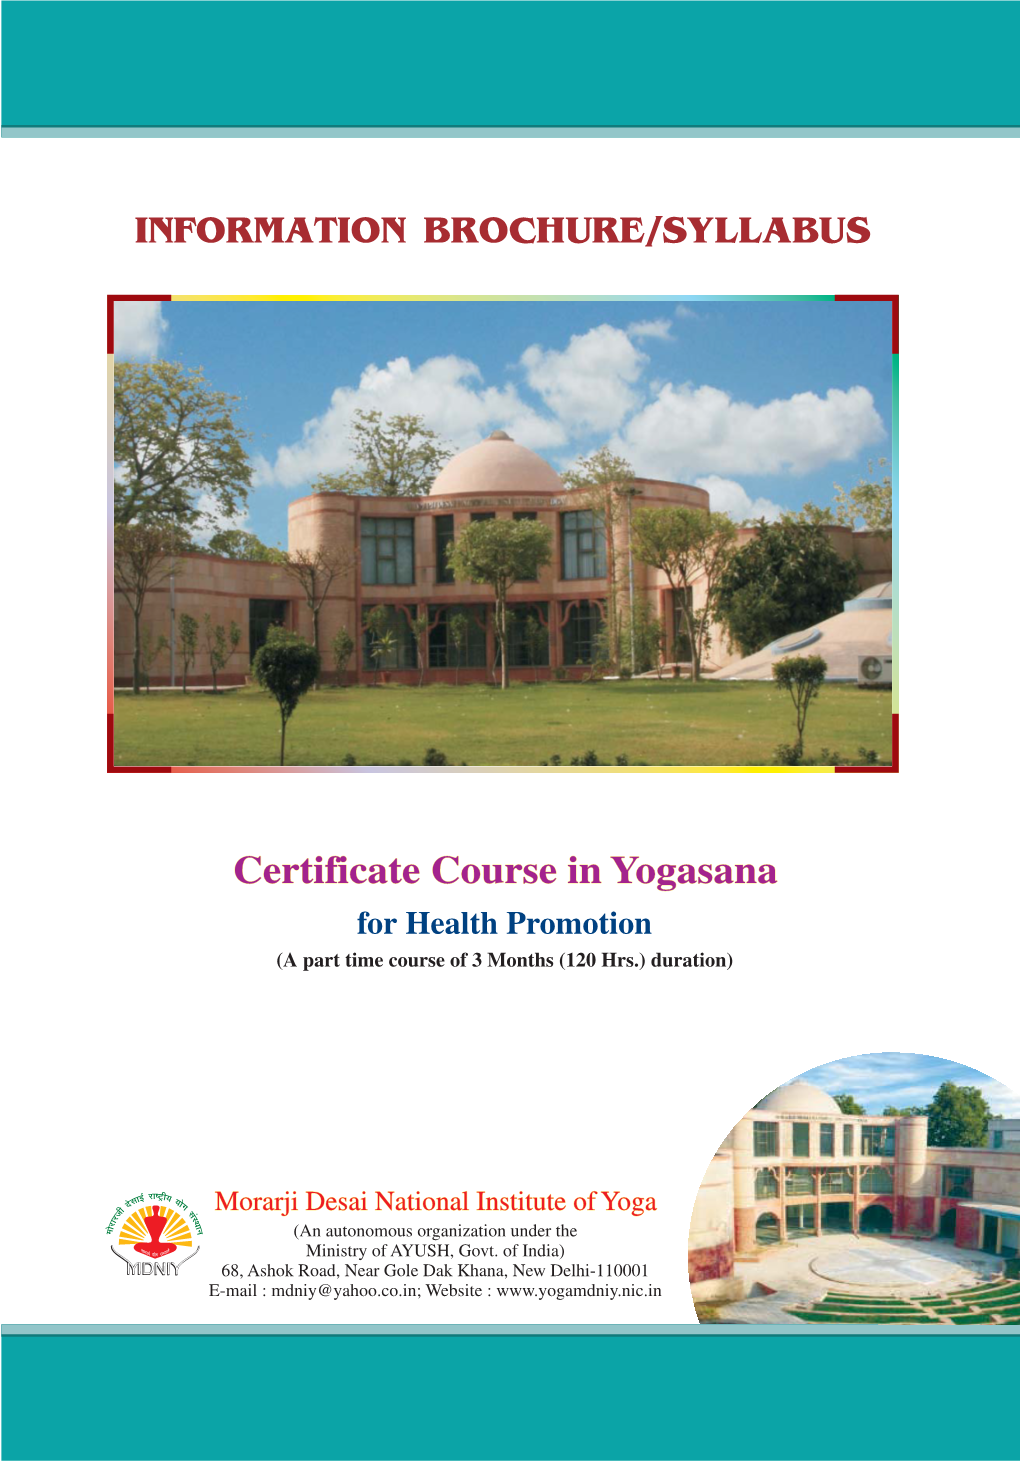 Certificate Course in Yogasana for Health Promotion (A Part Time Course of 3 Months (120 Hrs.) Duration)